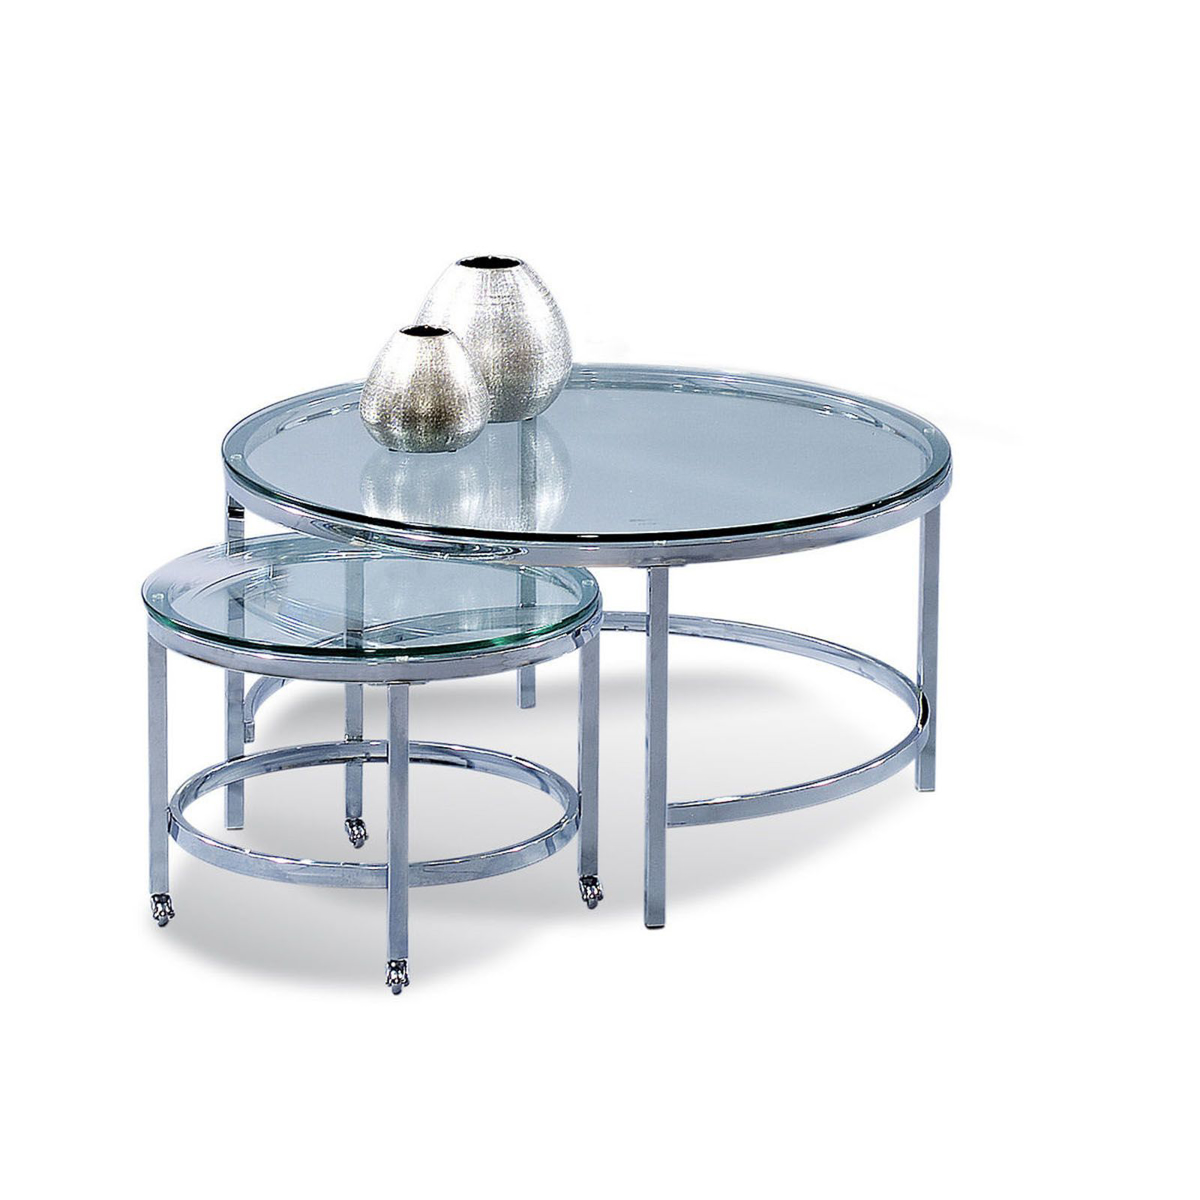 Picture of Patinore Round Cocktail Table